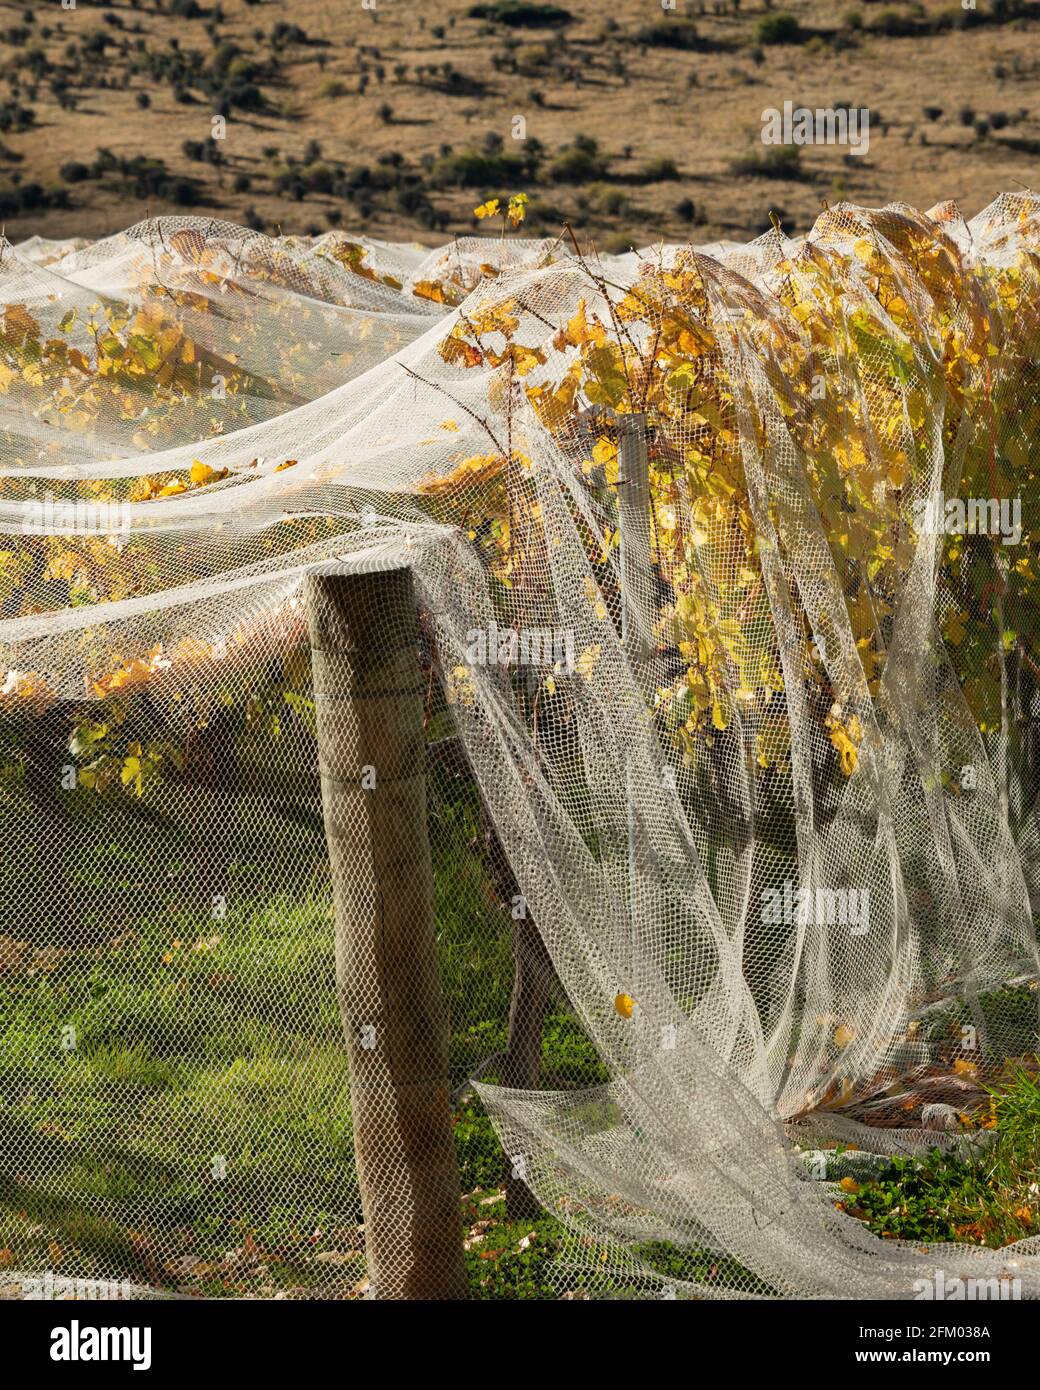 Netting on autumn yellow vines to prevent bird and wind damage, Otago region. Vertical format Stock Photo